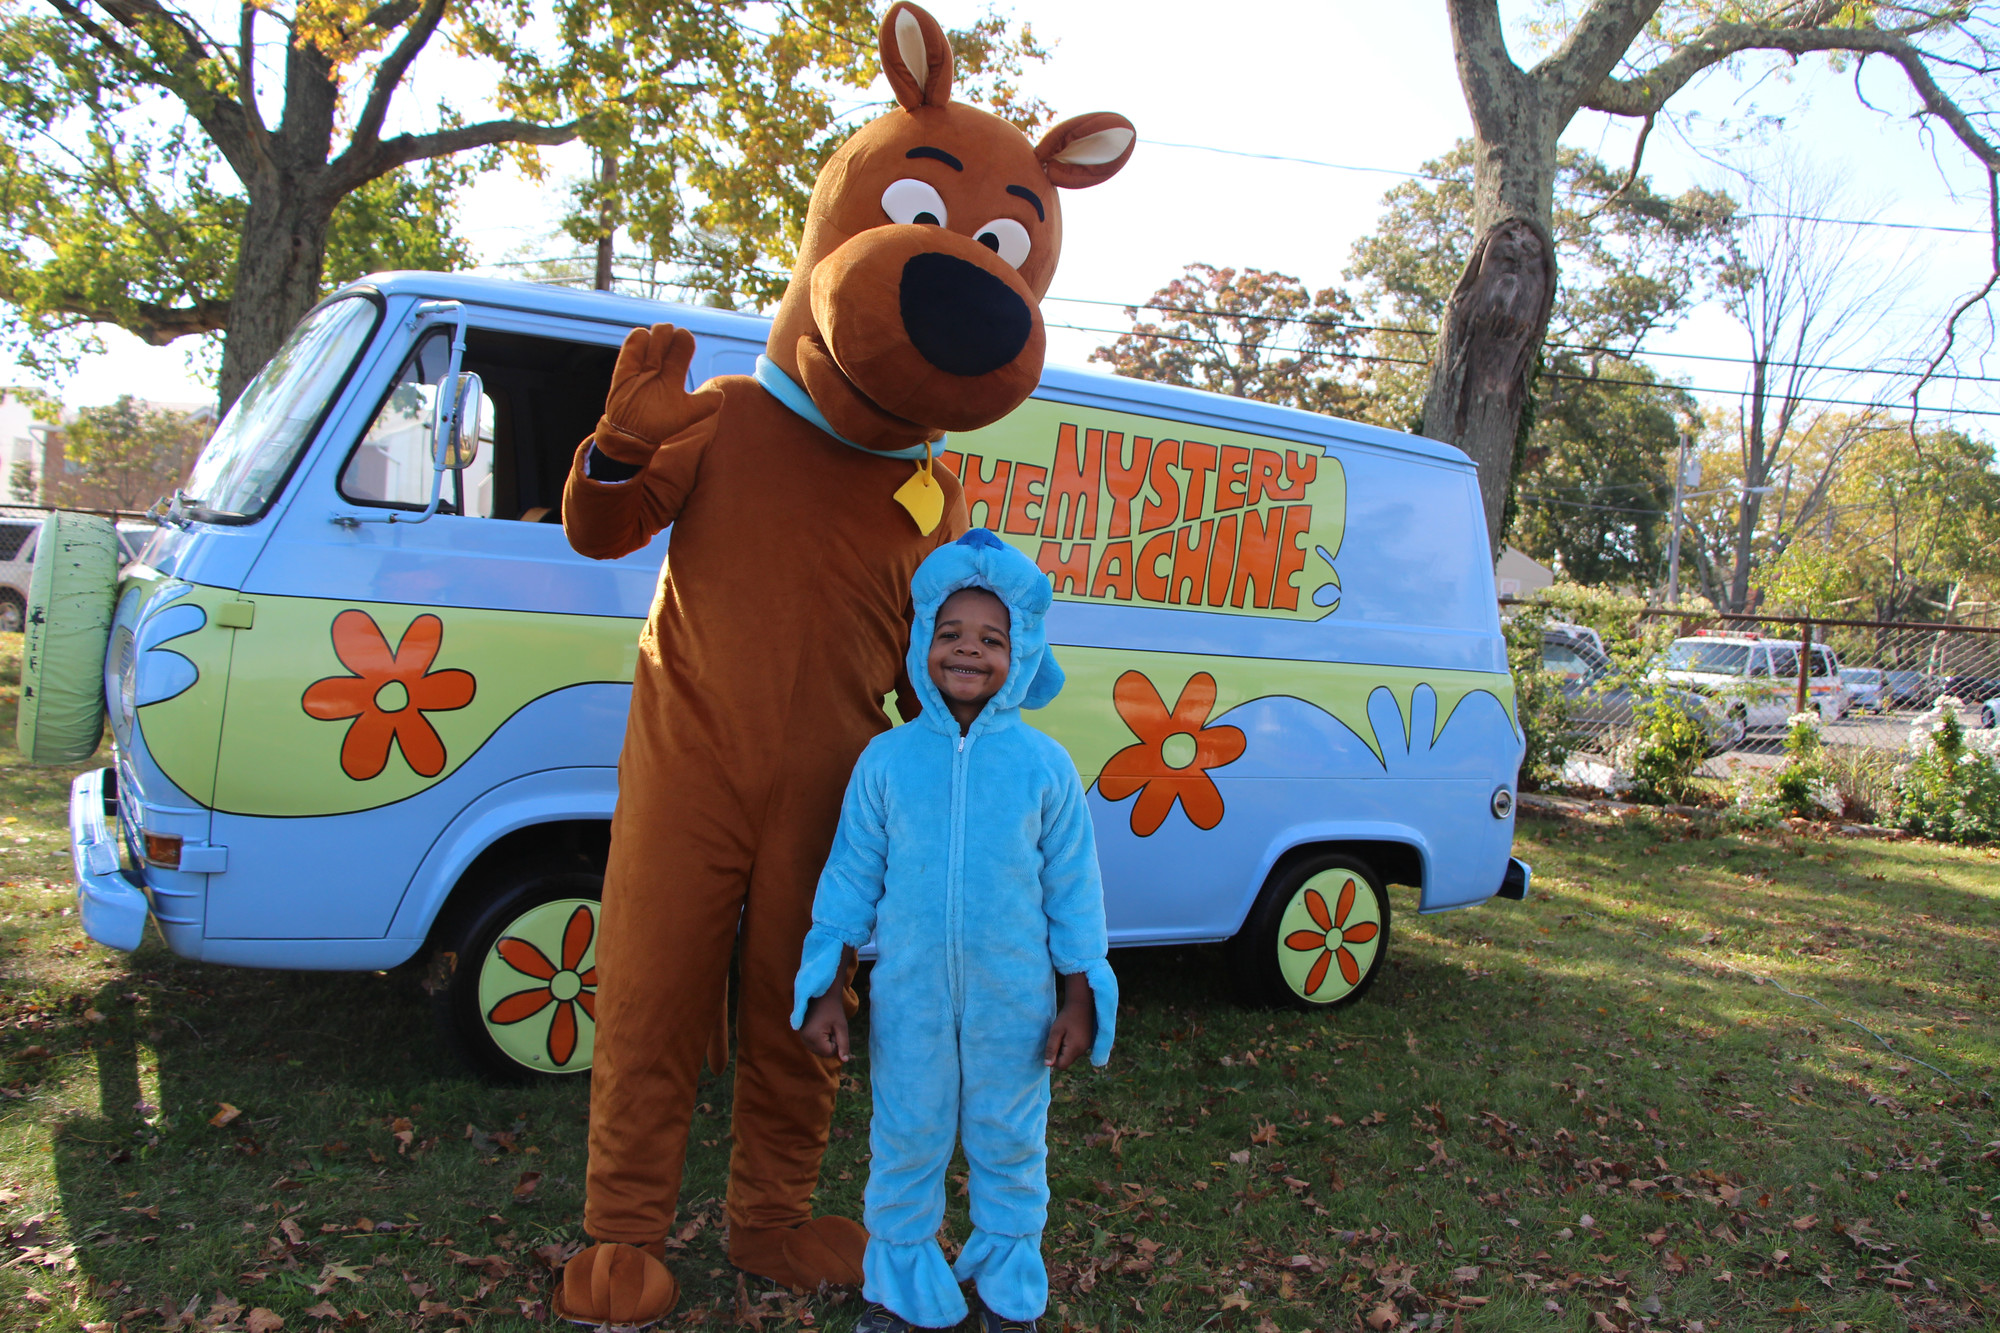 Laron Gilbert, 5, was Blue from Blue’s Clues and hung out with Scooby Doo and the his Mystery Machine.